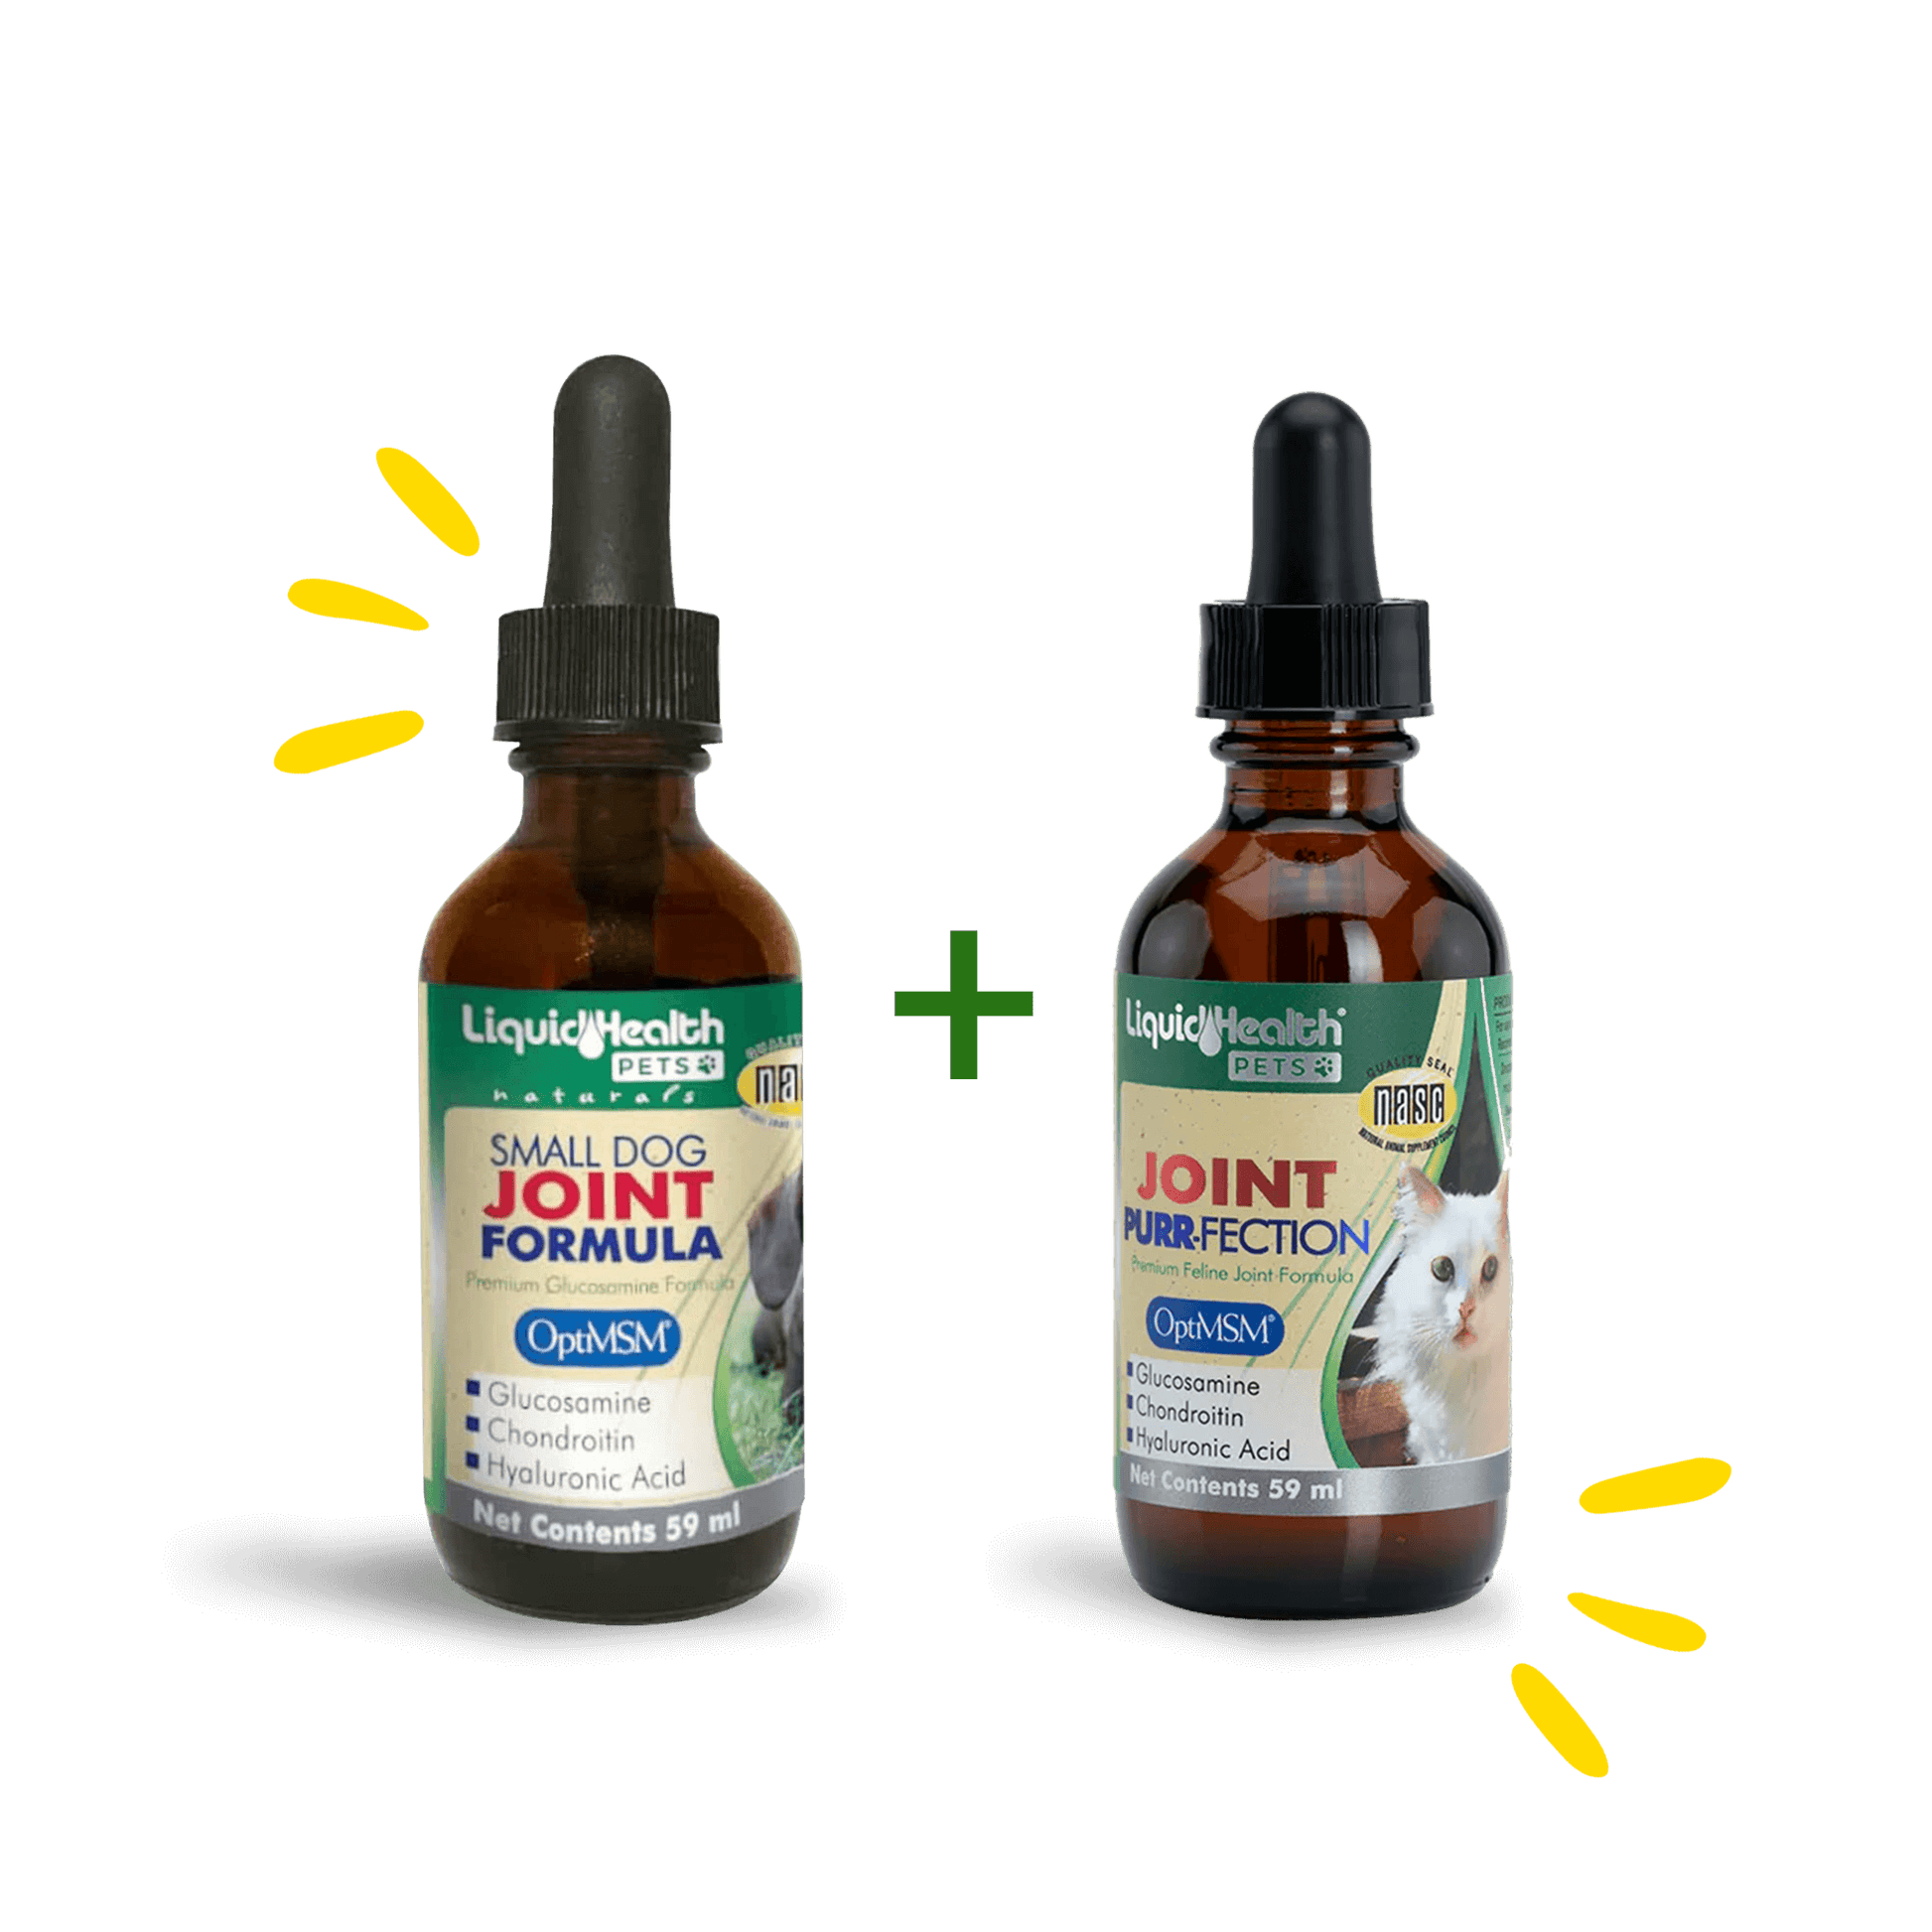 Liquid-Health-Pets-K9-Kitty-Joint-Dropper-Bundle-joint-purrfection-small-dog